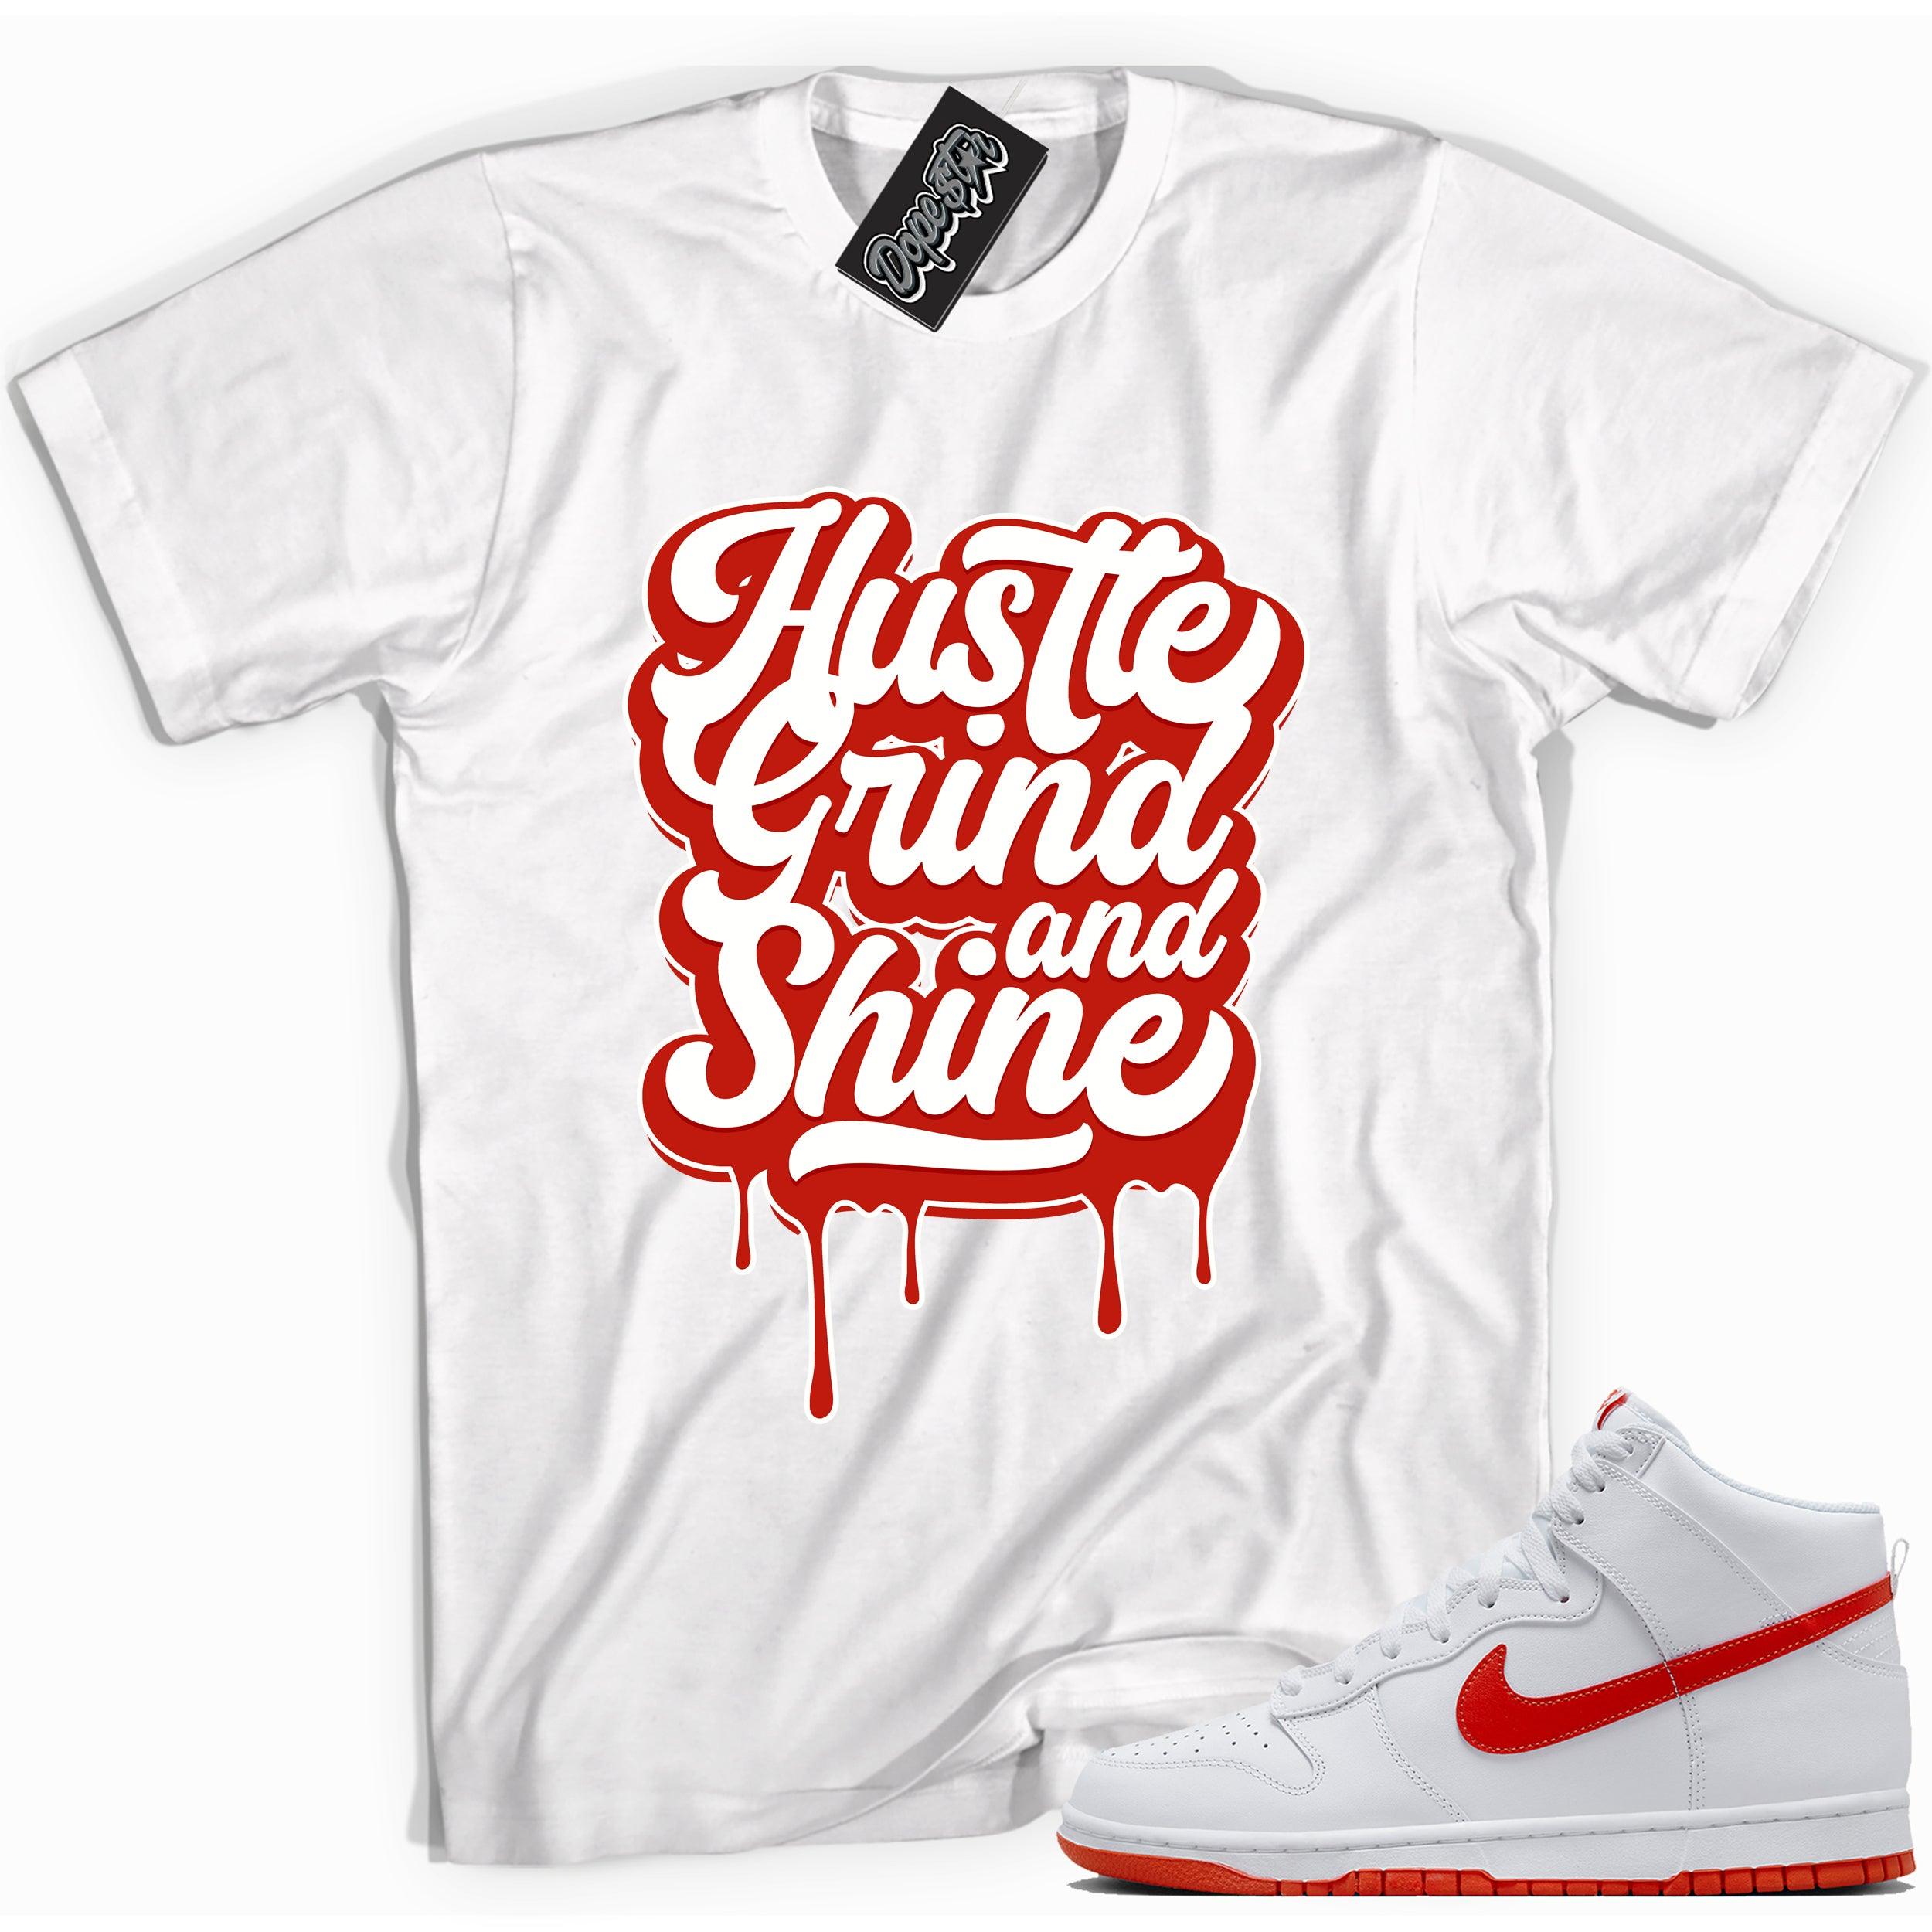 Cool white graphic tee with 'hustle grind and shine' print, that perfectly matches Nike Dunk High White Picante Red sneakers.